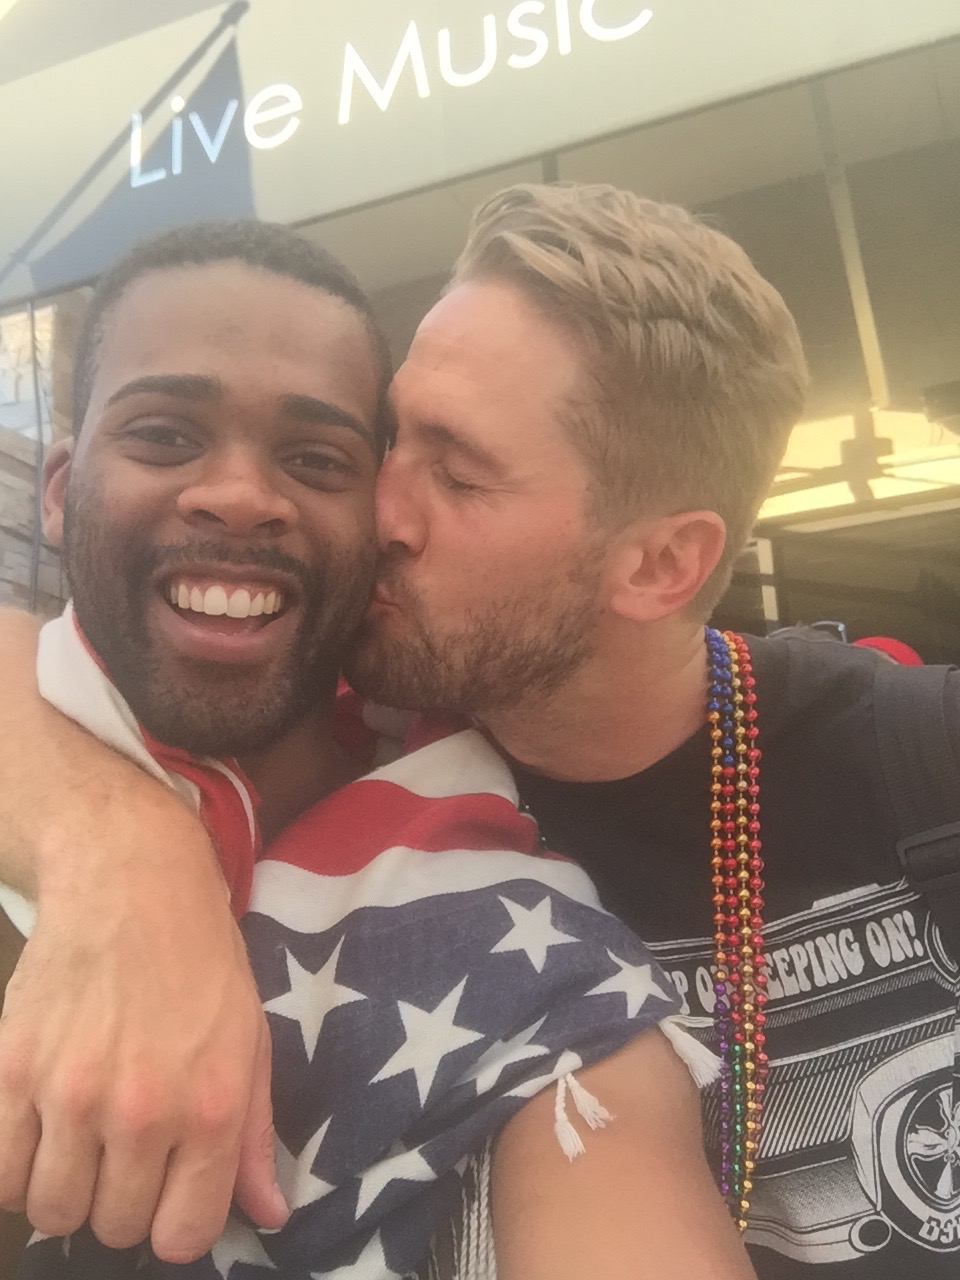 Wesley Woods and Shawn Monroe at Dallas Pride 2016